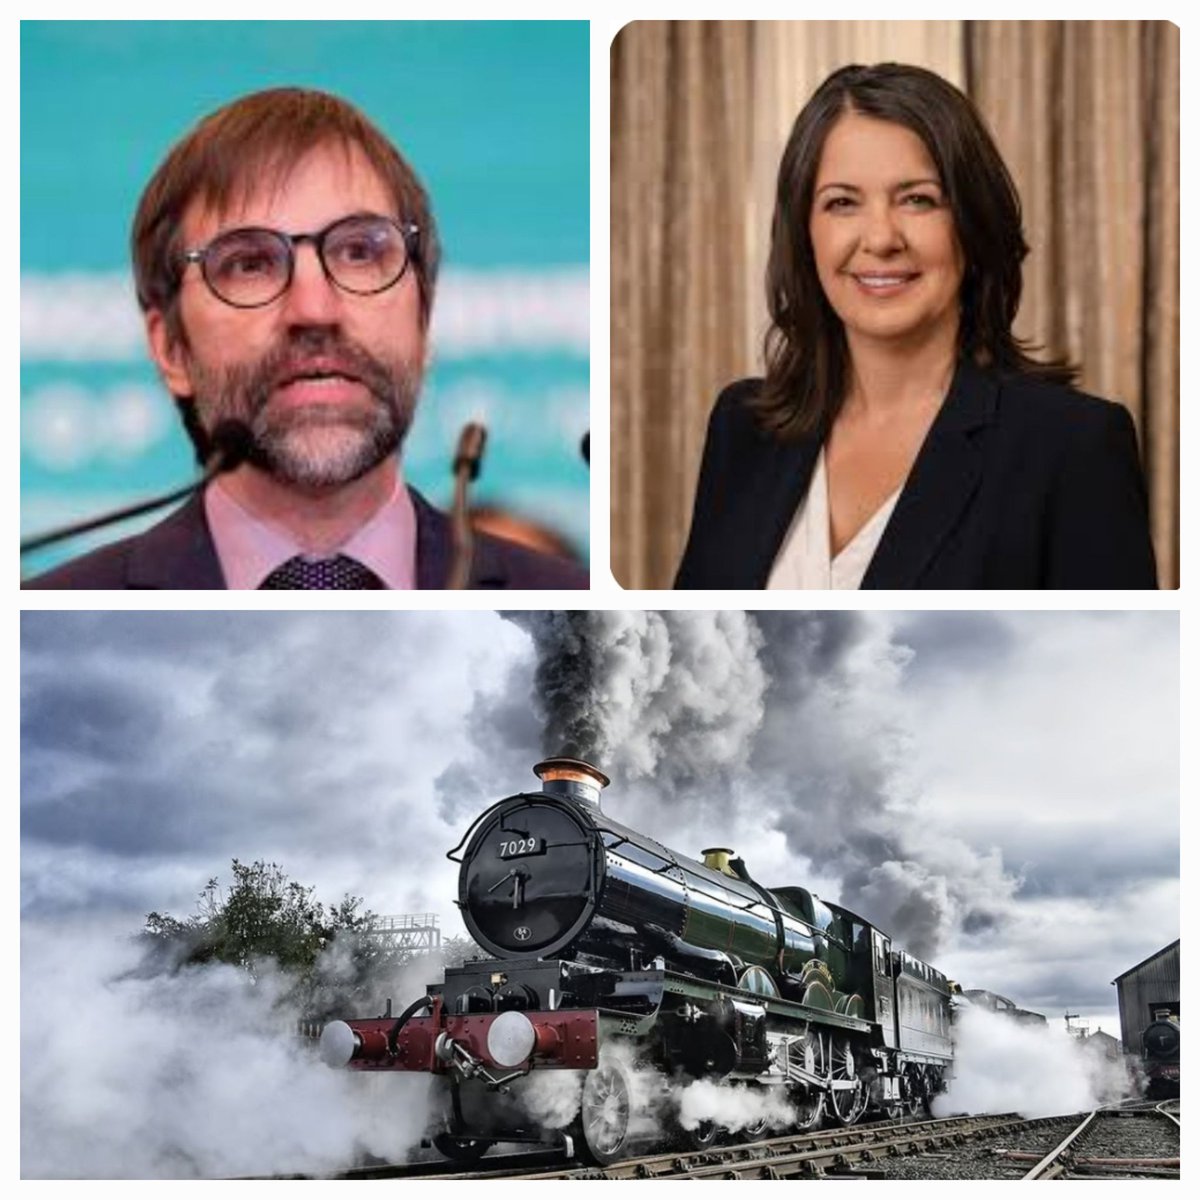 Angered by Ottawa's demands for more green energy by the province, Alberta Premier Danielle Smith orders all trains going through Alberta must be coal powered. #cdnpl #Alberta #daniellesmith #stevenGuilbeault